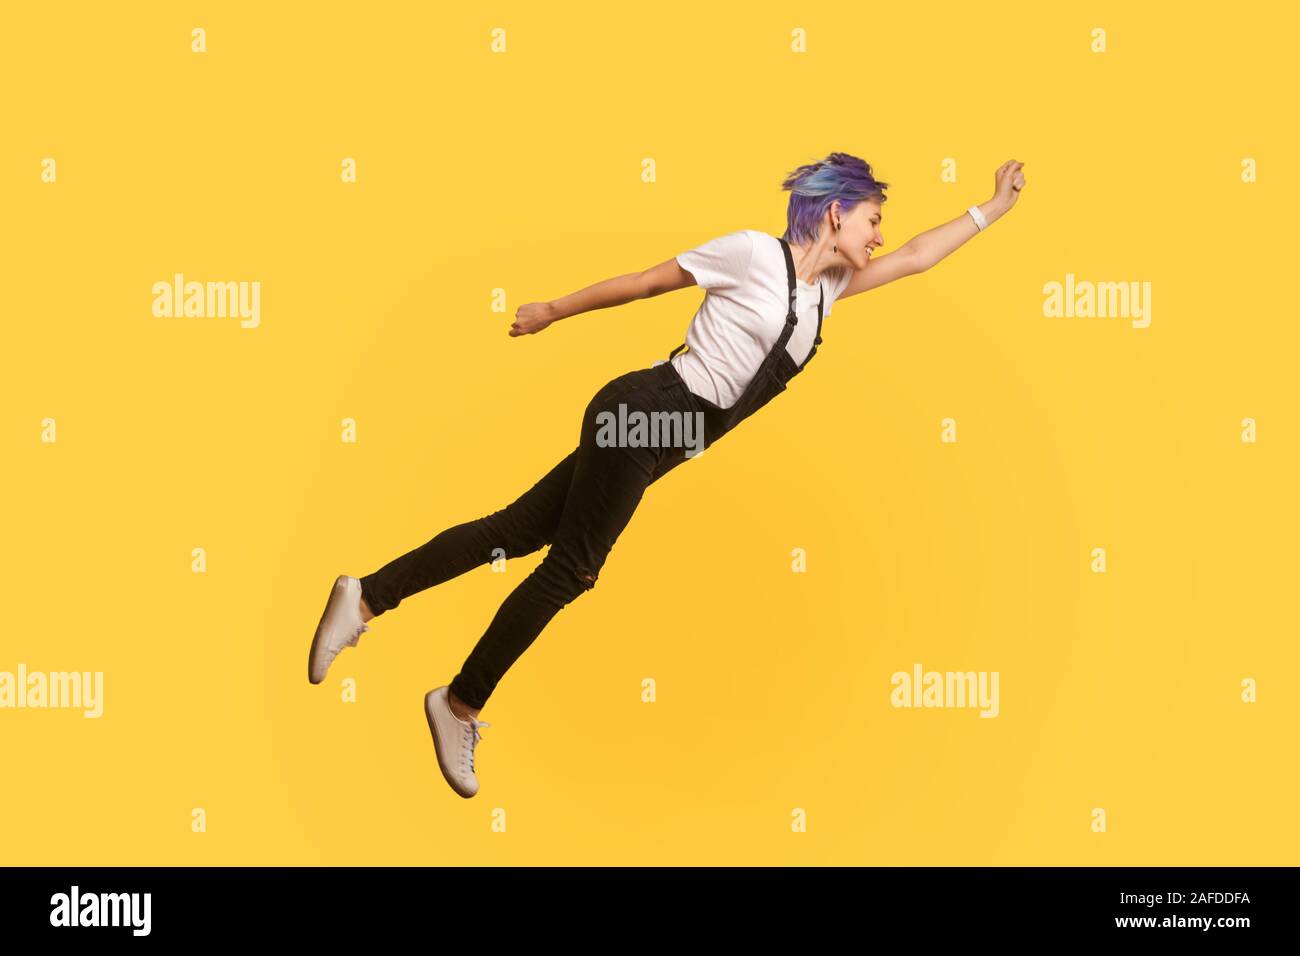 Superman. Portrait of enthusiastic ambitious hipster girl with violet short hair in denim overalls flying like superhero in air, feeling free, strivin Stock Photo